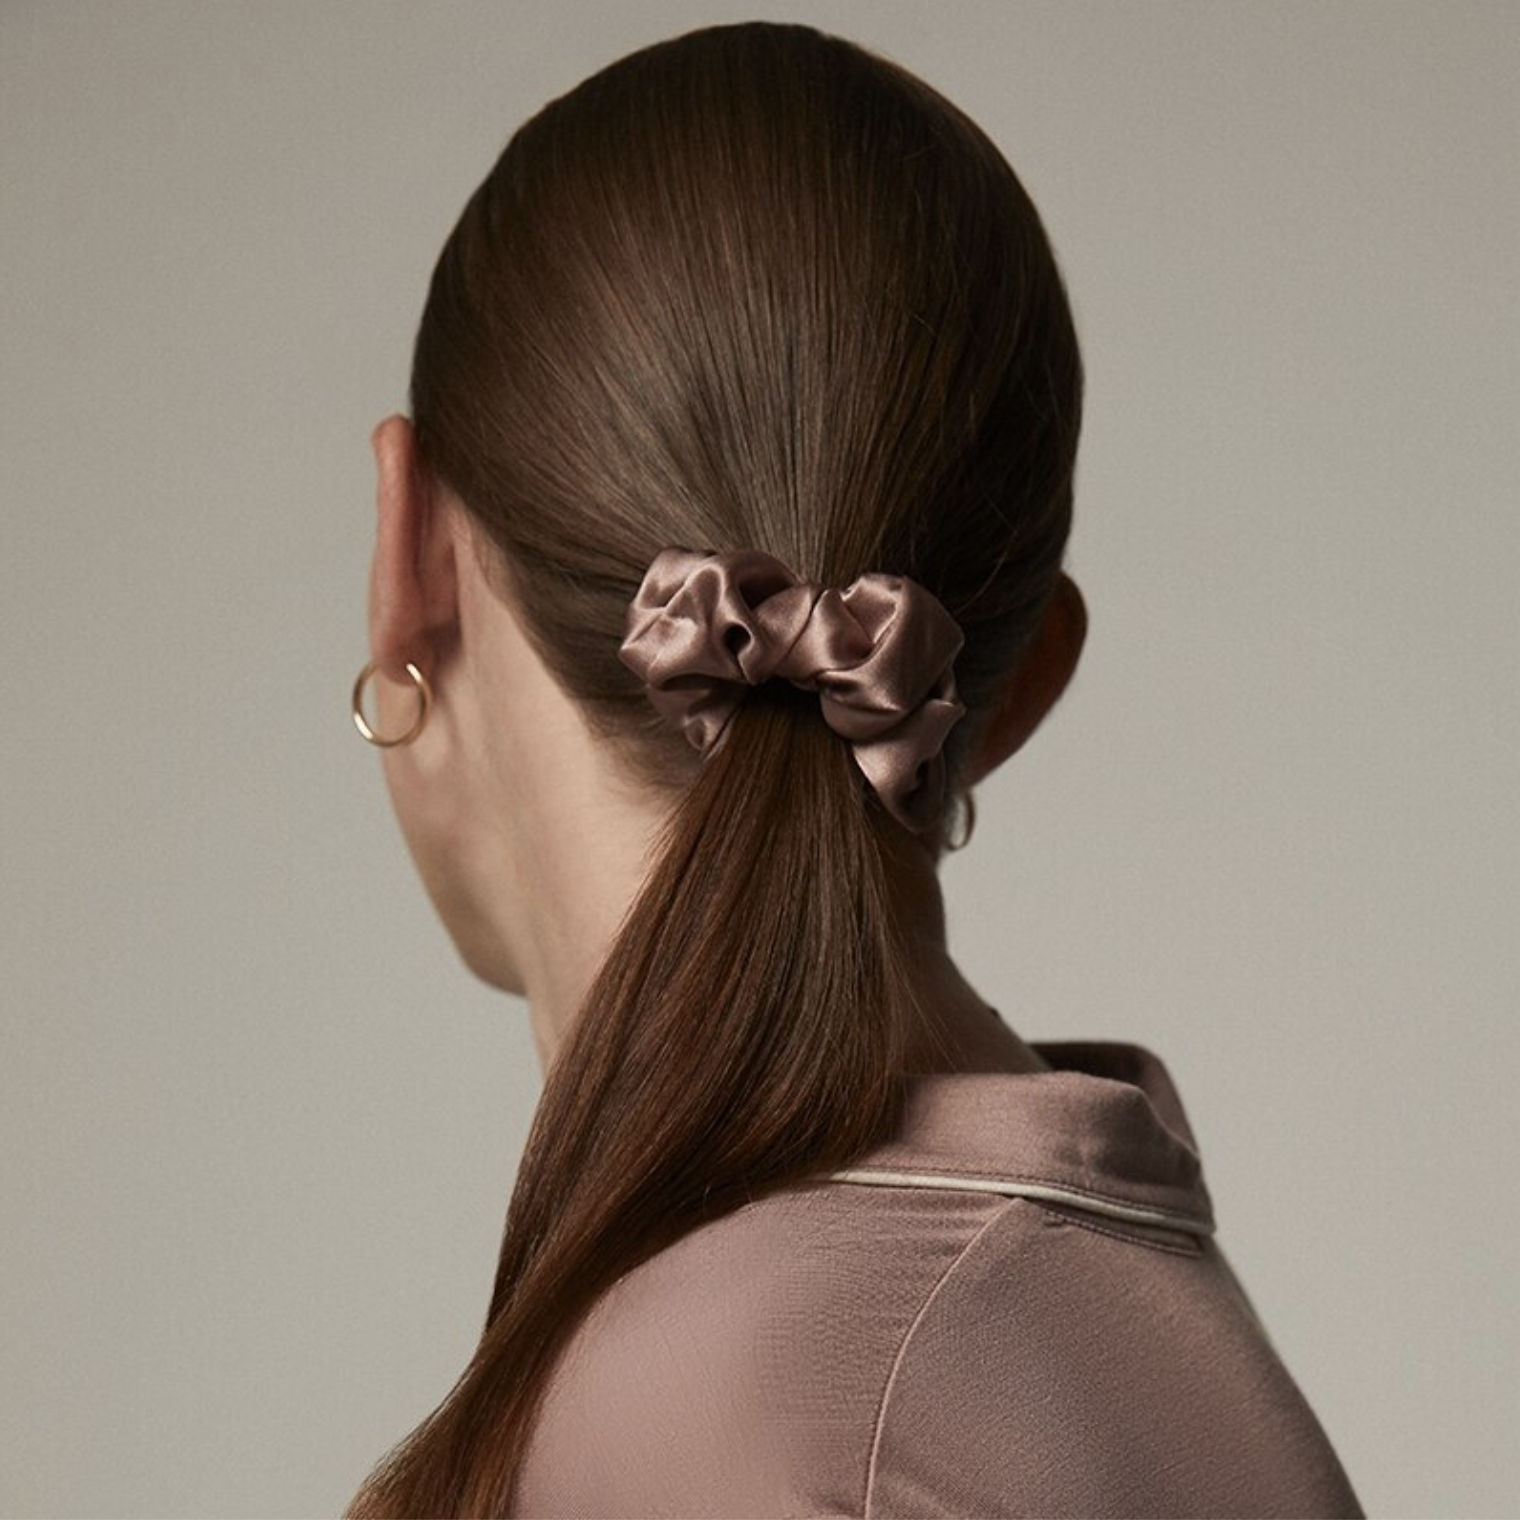 A person wearing the scrunchie in their ponytail